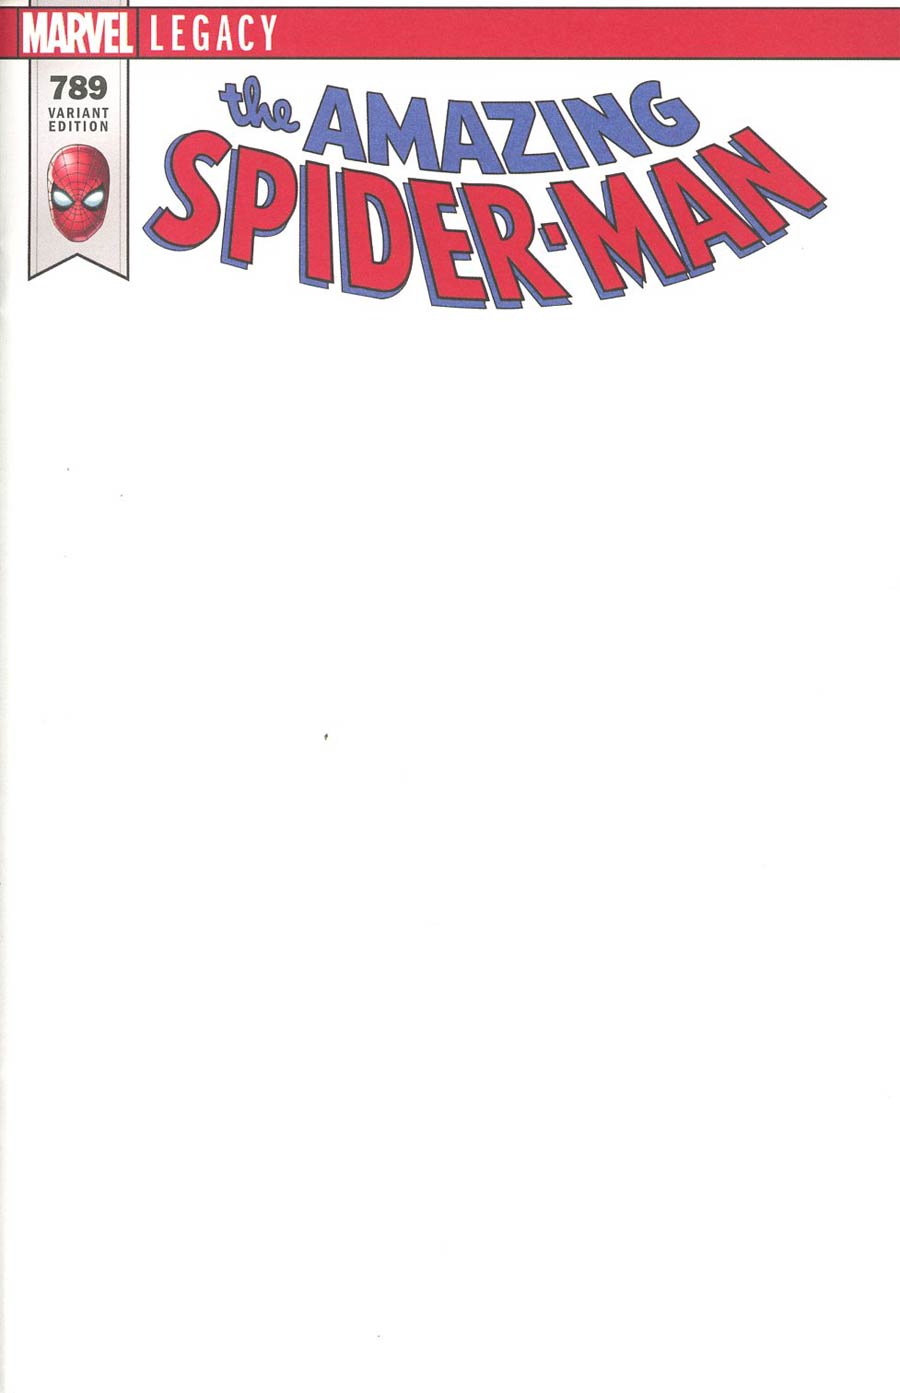 Amazing Spider-Man Vol 4 #789 Cover C Variant Blank Cover (Marvel Legacy Tie-In)